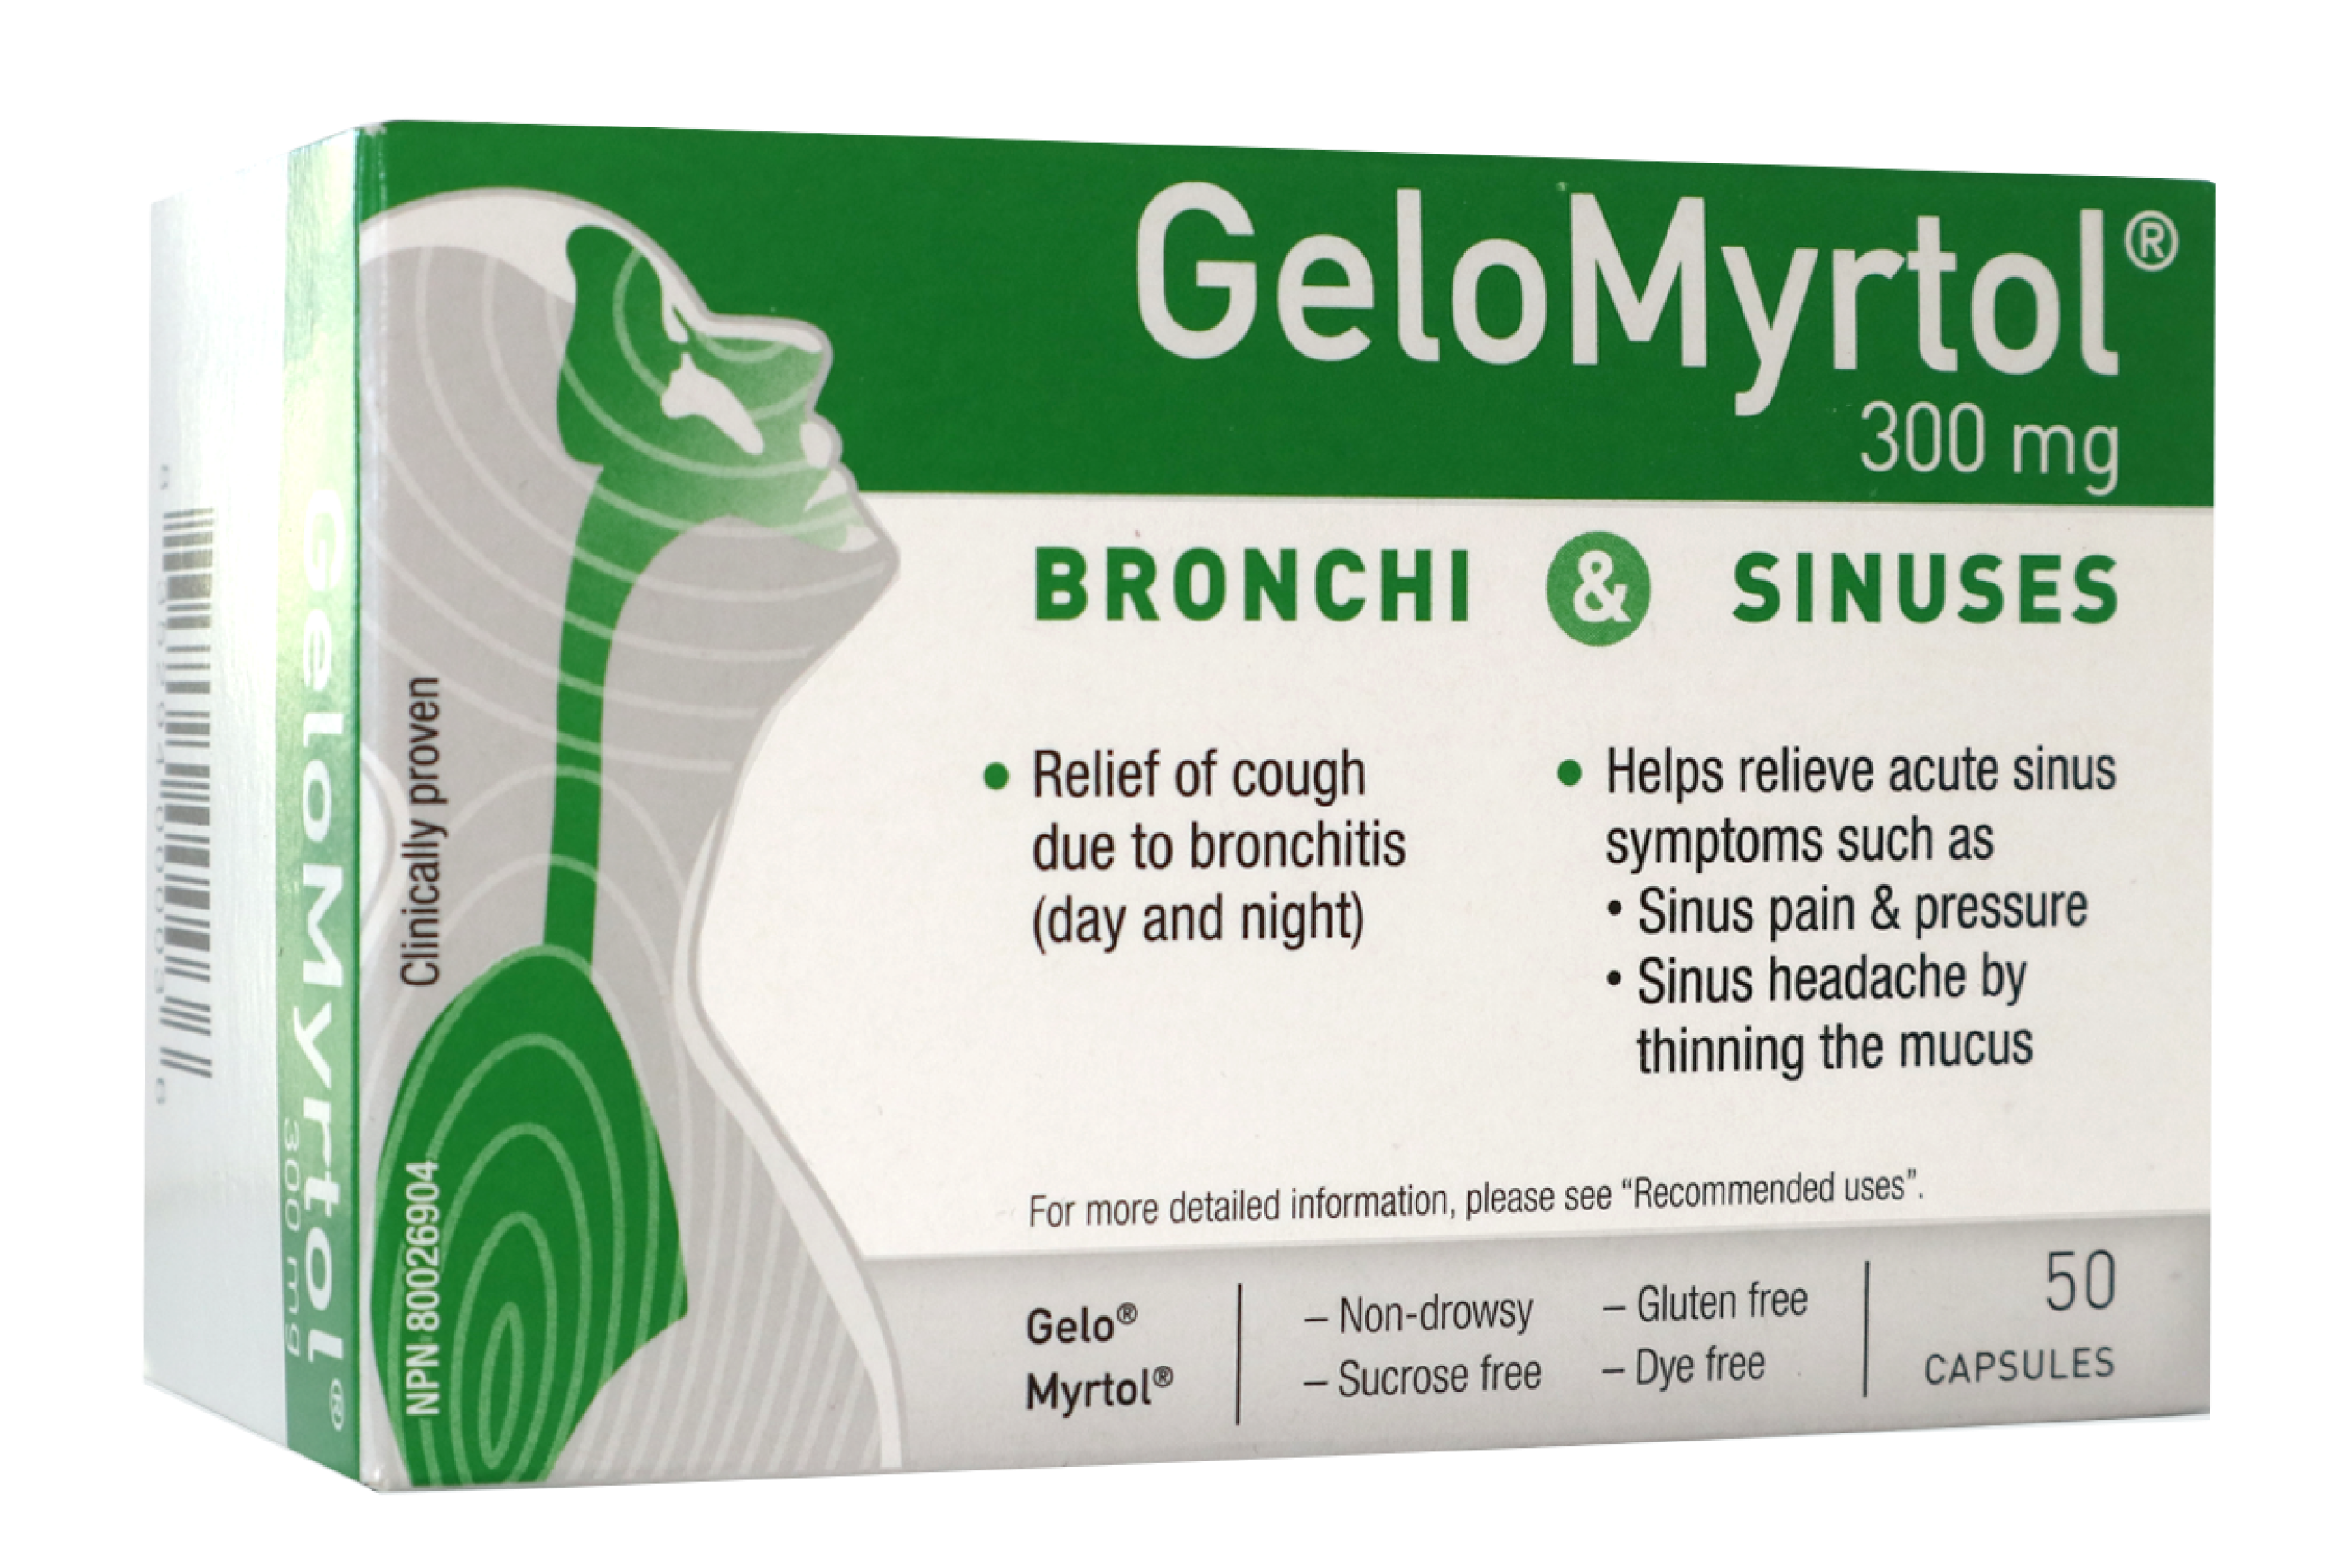 GeloMyrtol box. The box is green and white. It shows the GeloMyrtol logo and the name of the product. It also features an illustration of a person breathing with their respiratory system in green.